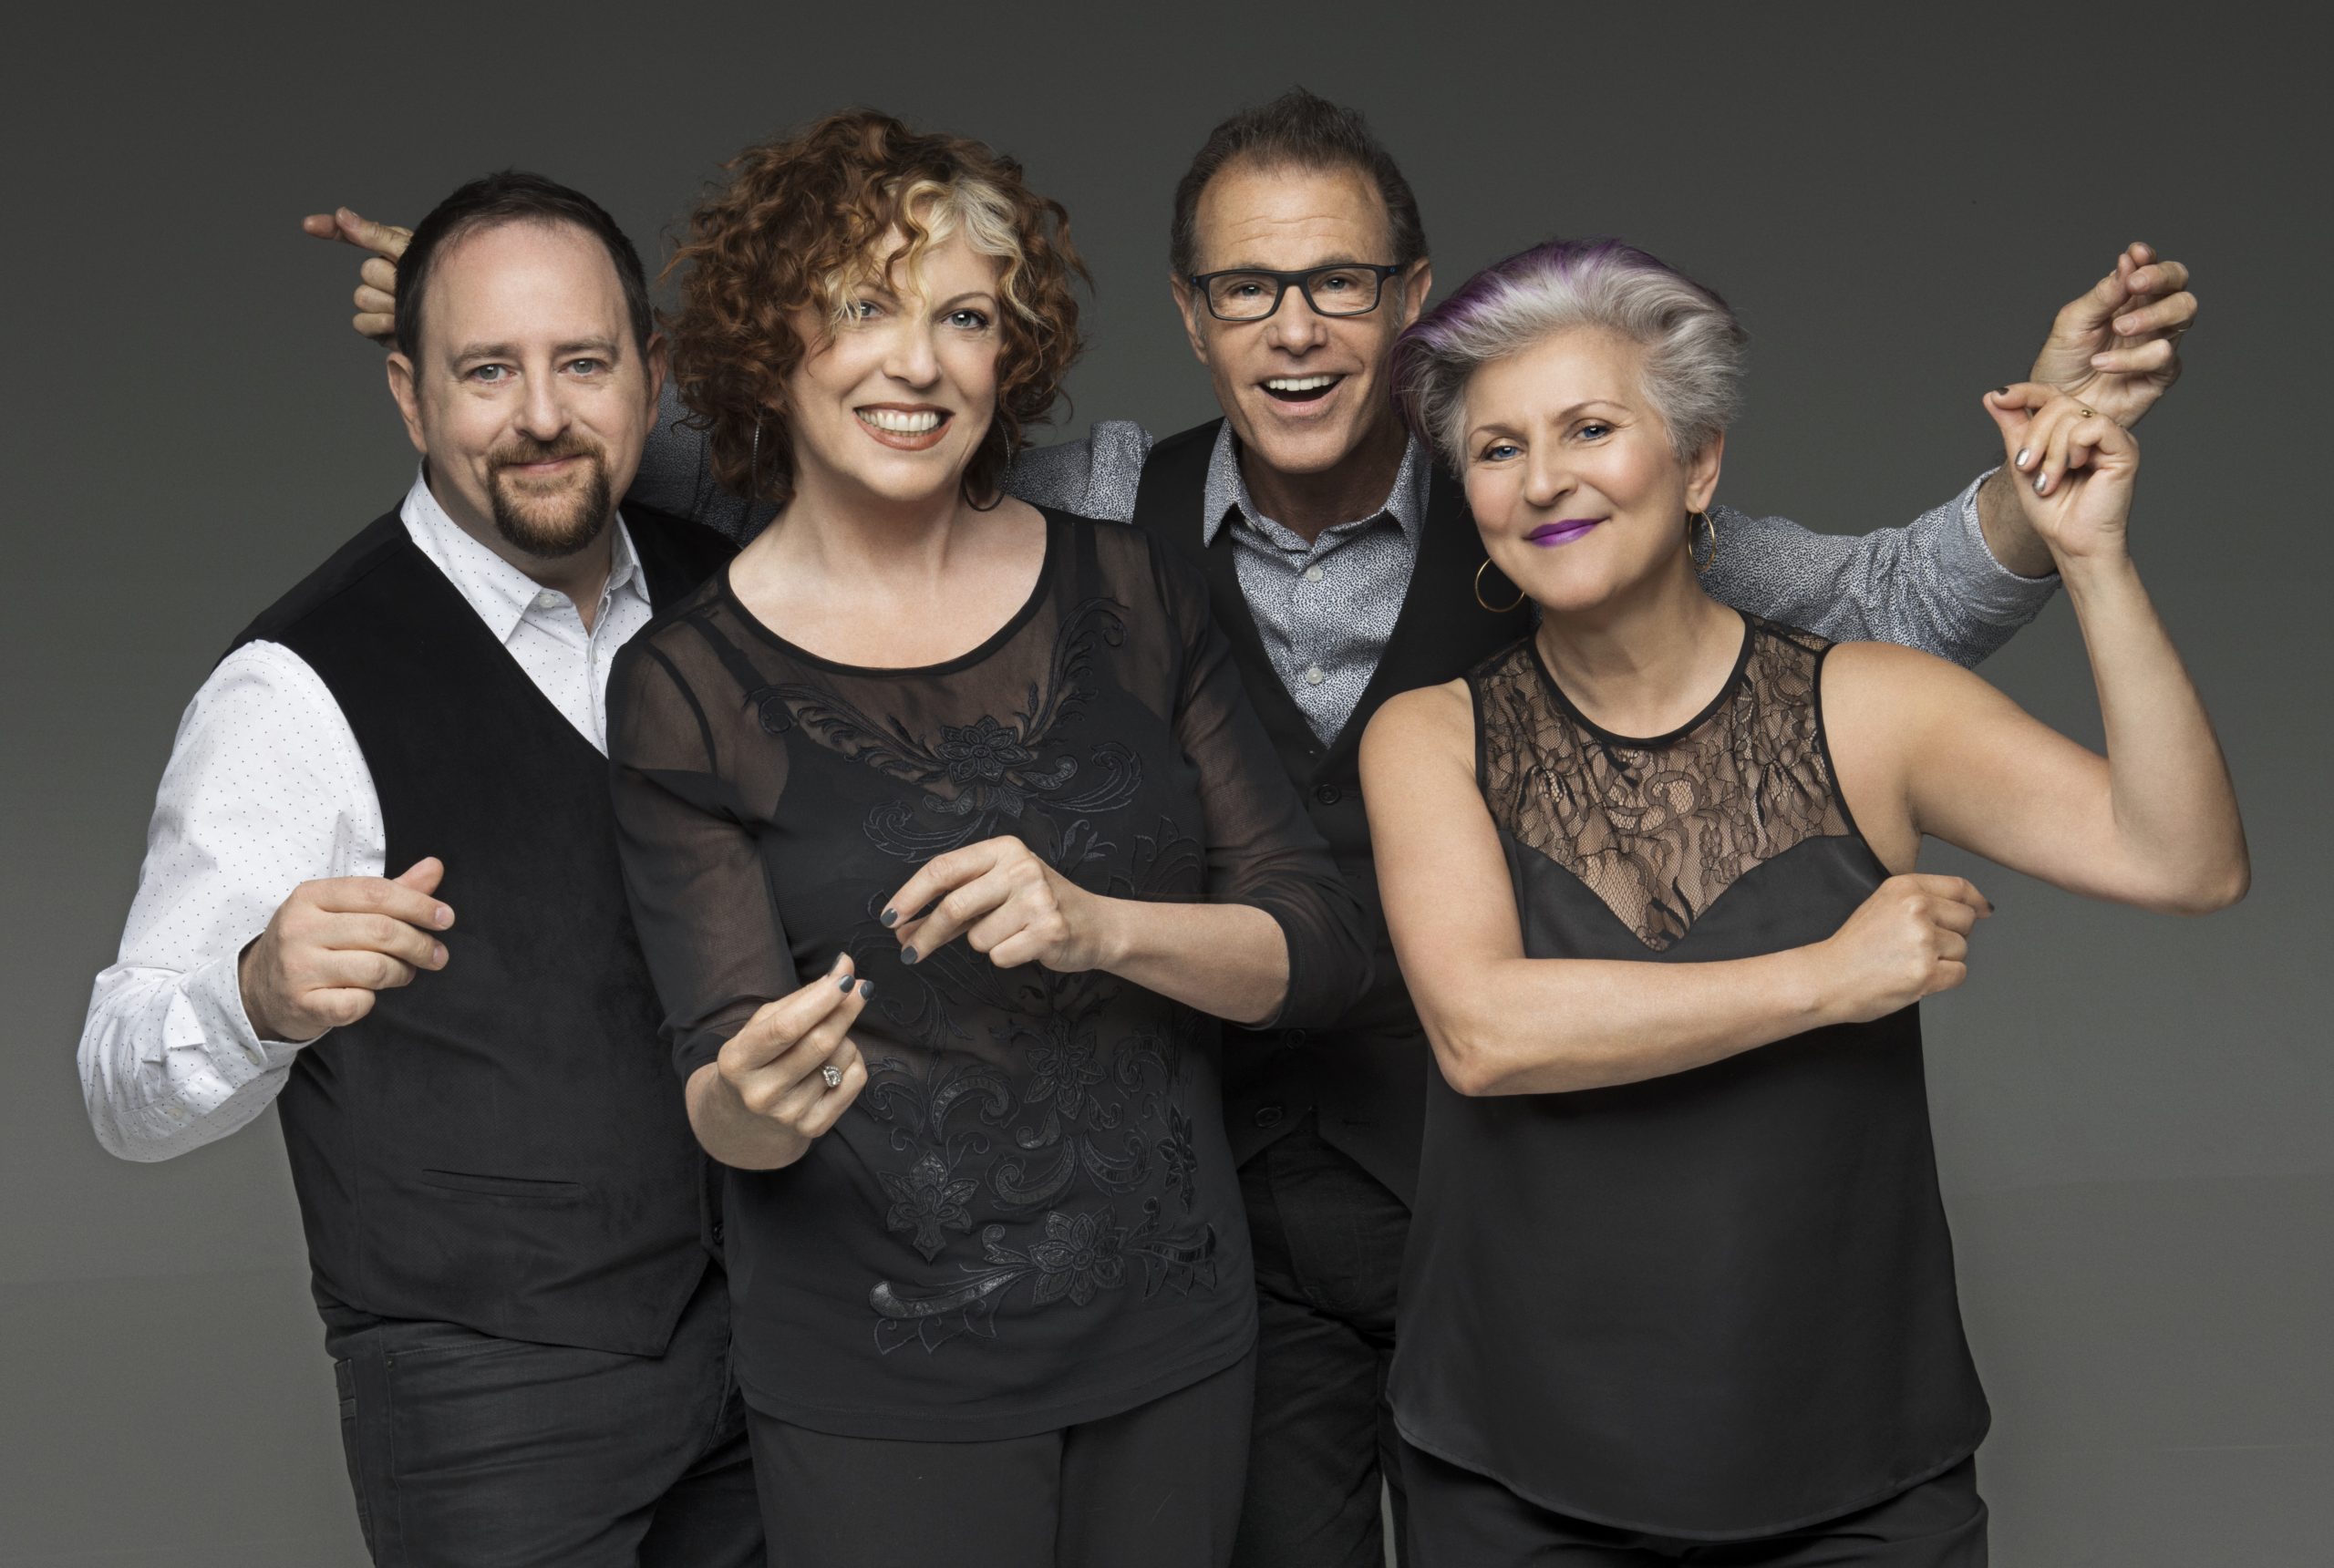 The Manhattan Transfer group two women and two men